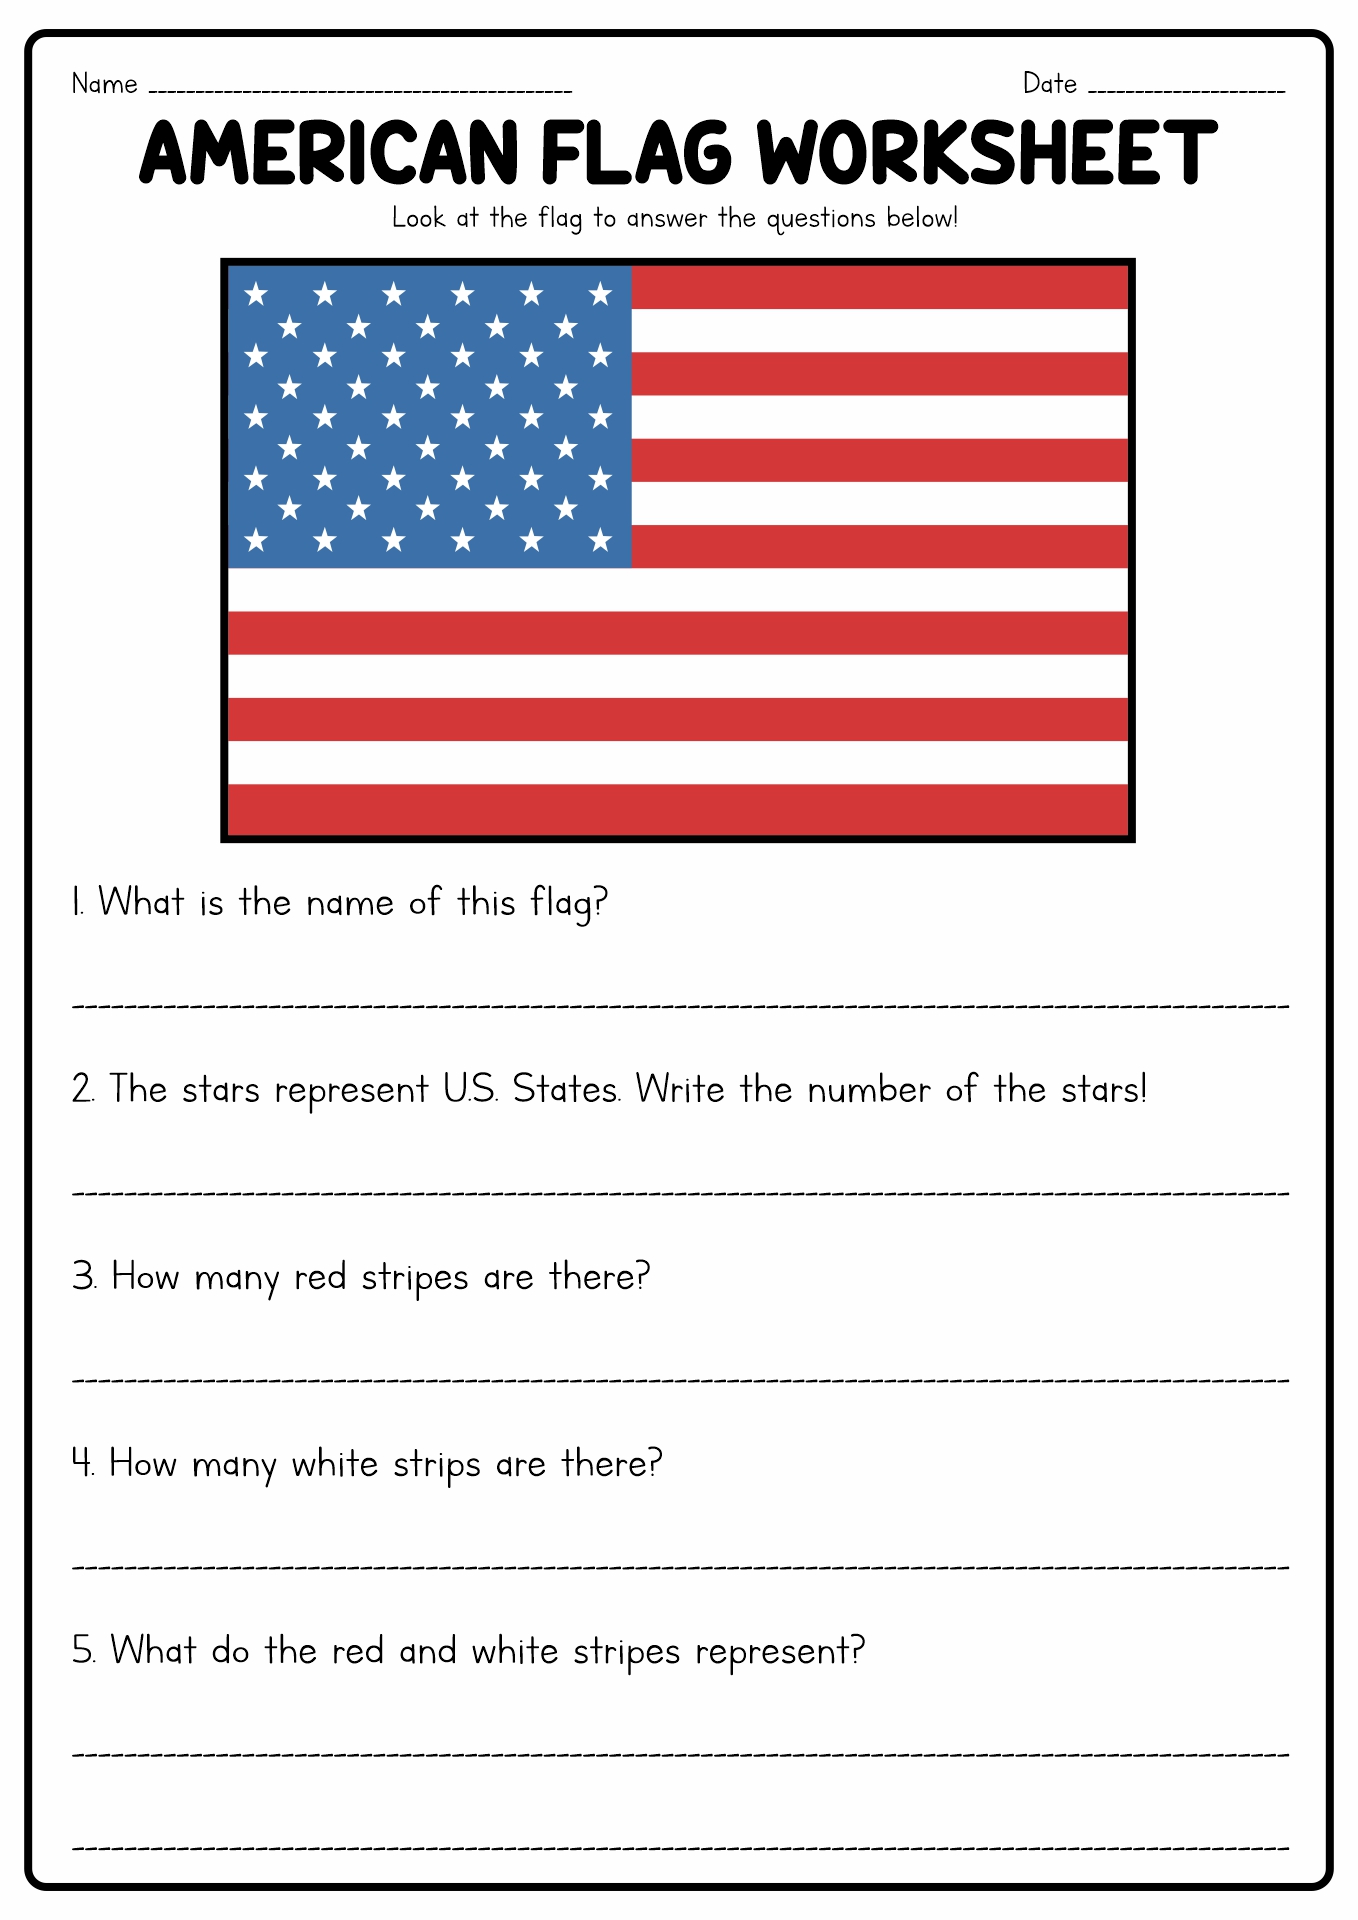 flag-day-activities-elementary